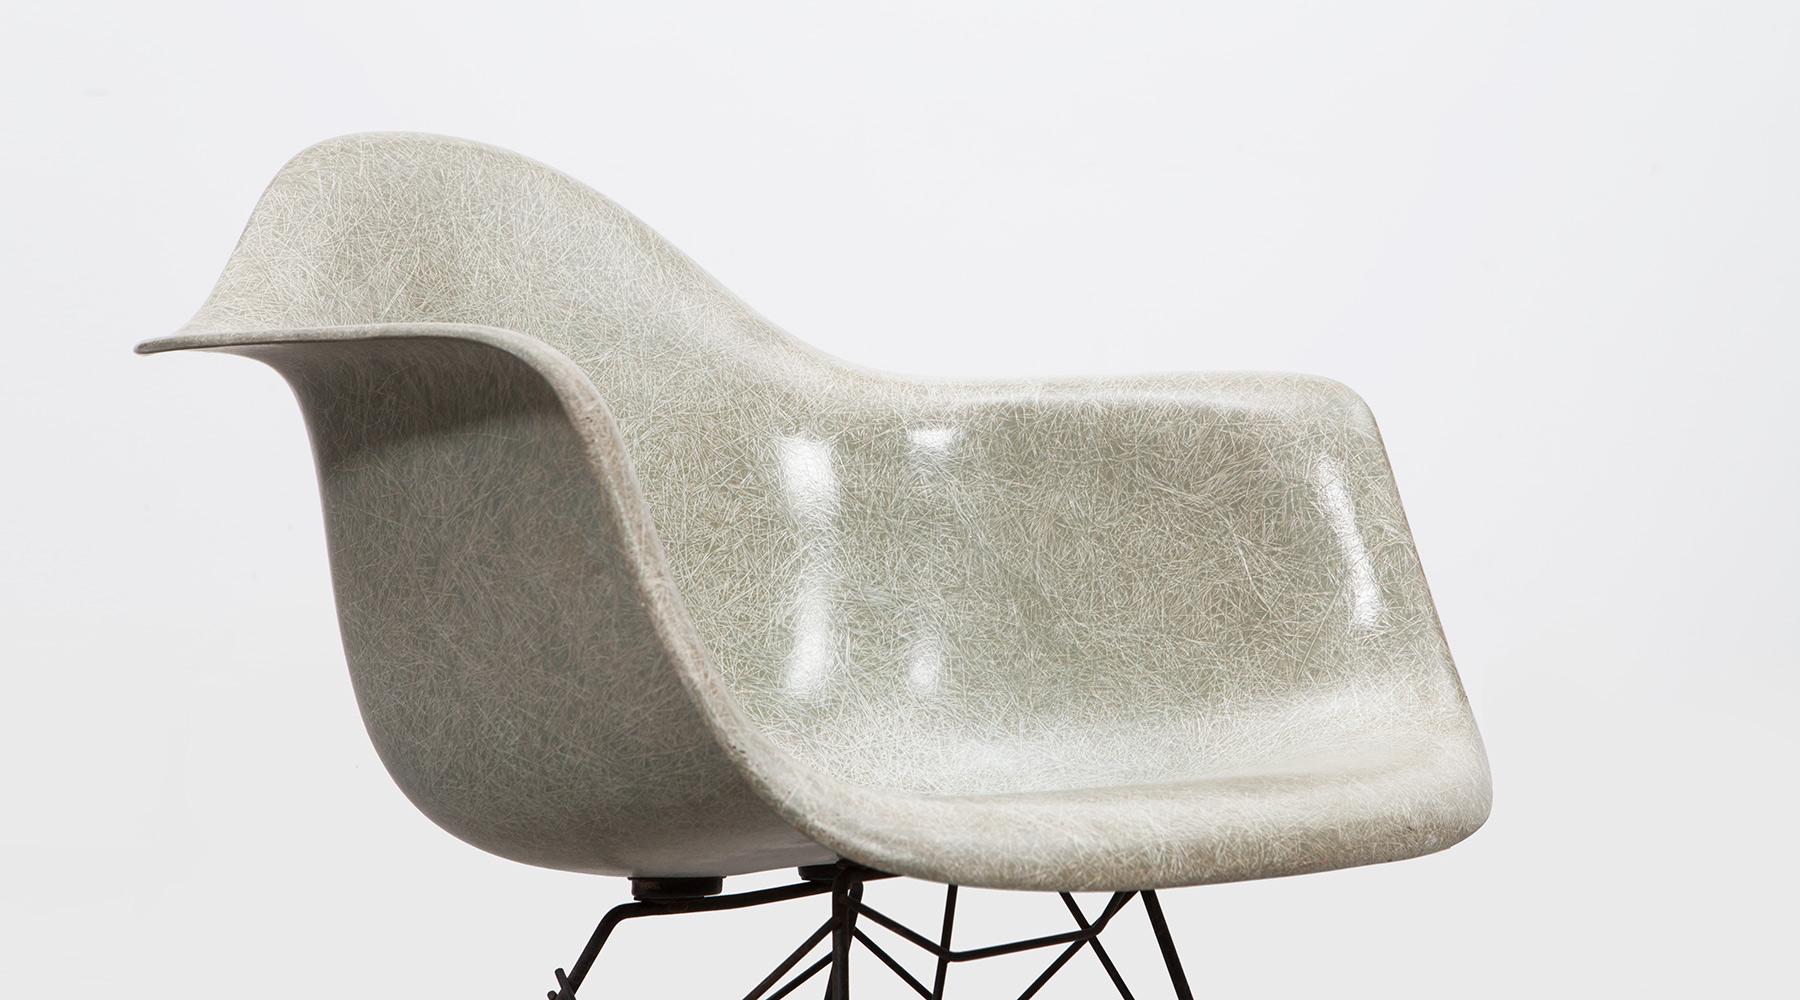 Metal 1948 Parchment Color Fiberglass Shell RAR Rocking Chair by Charles & Ray Eames